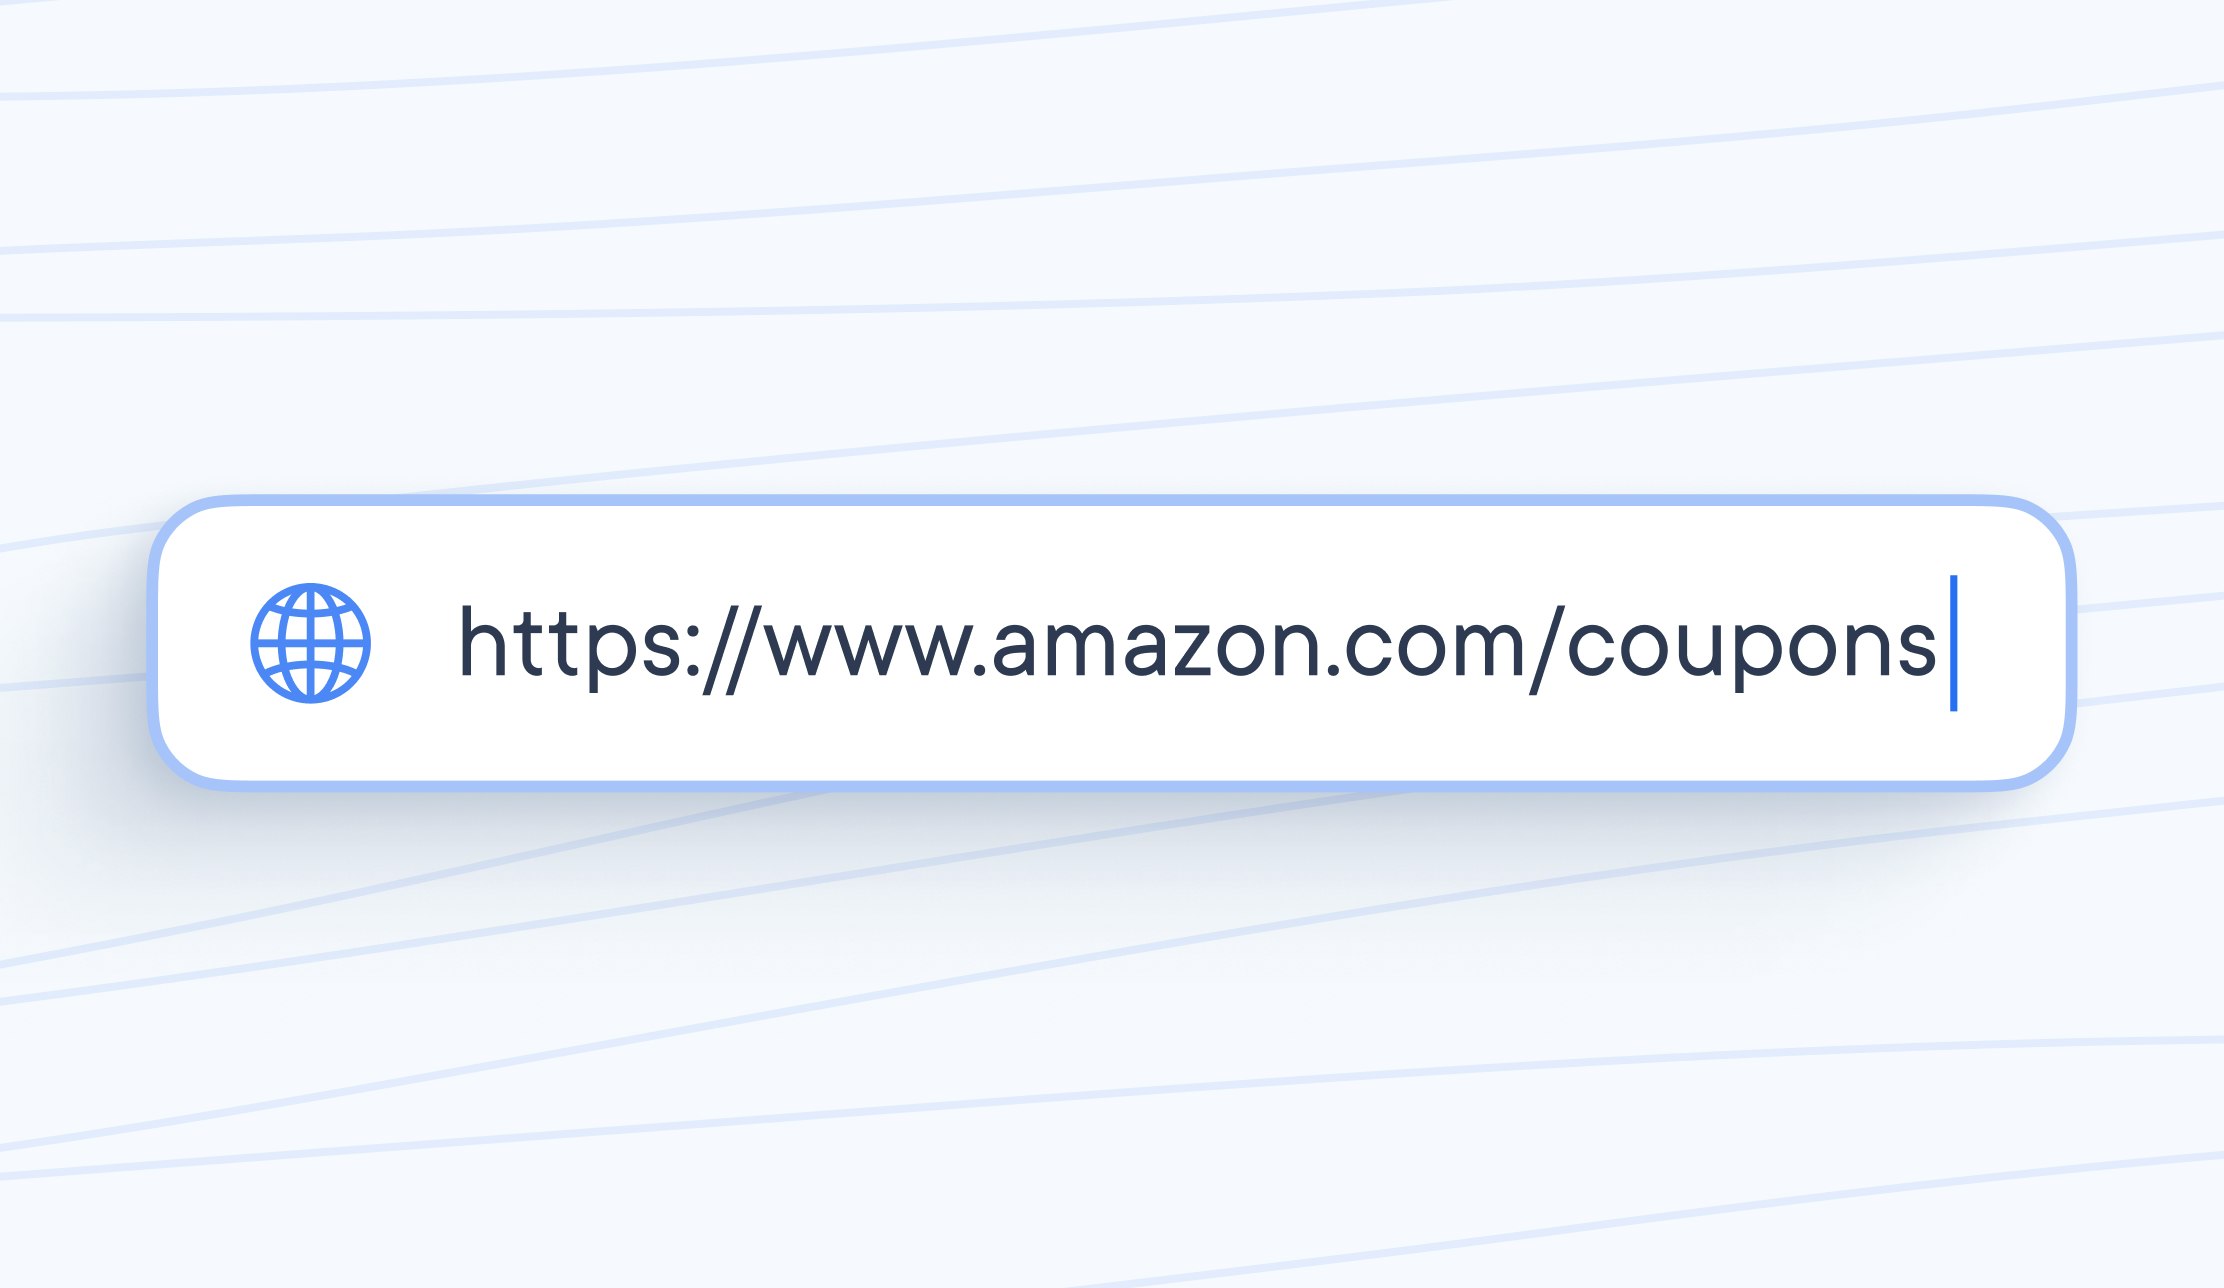 Amazon discount codes: How to get coupons